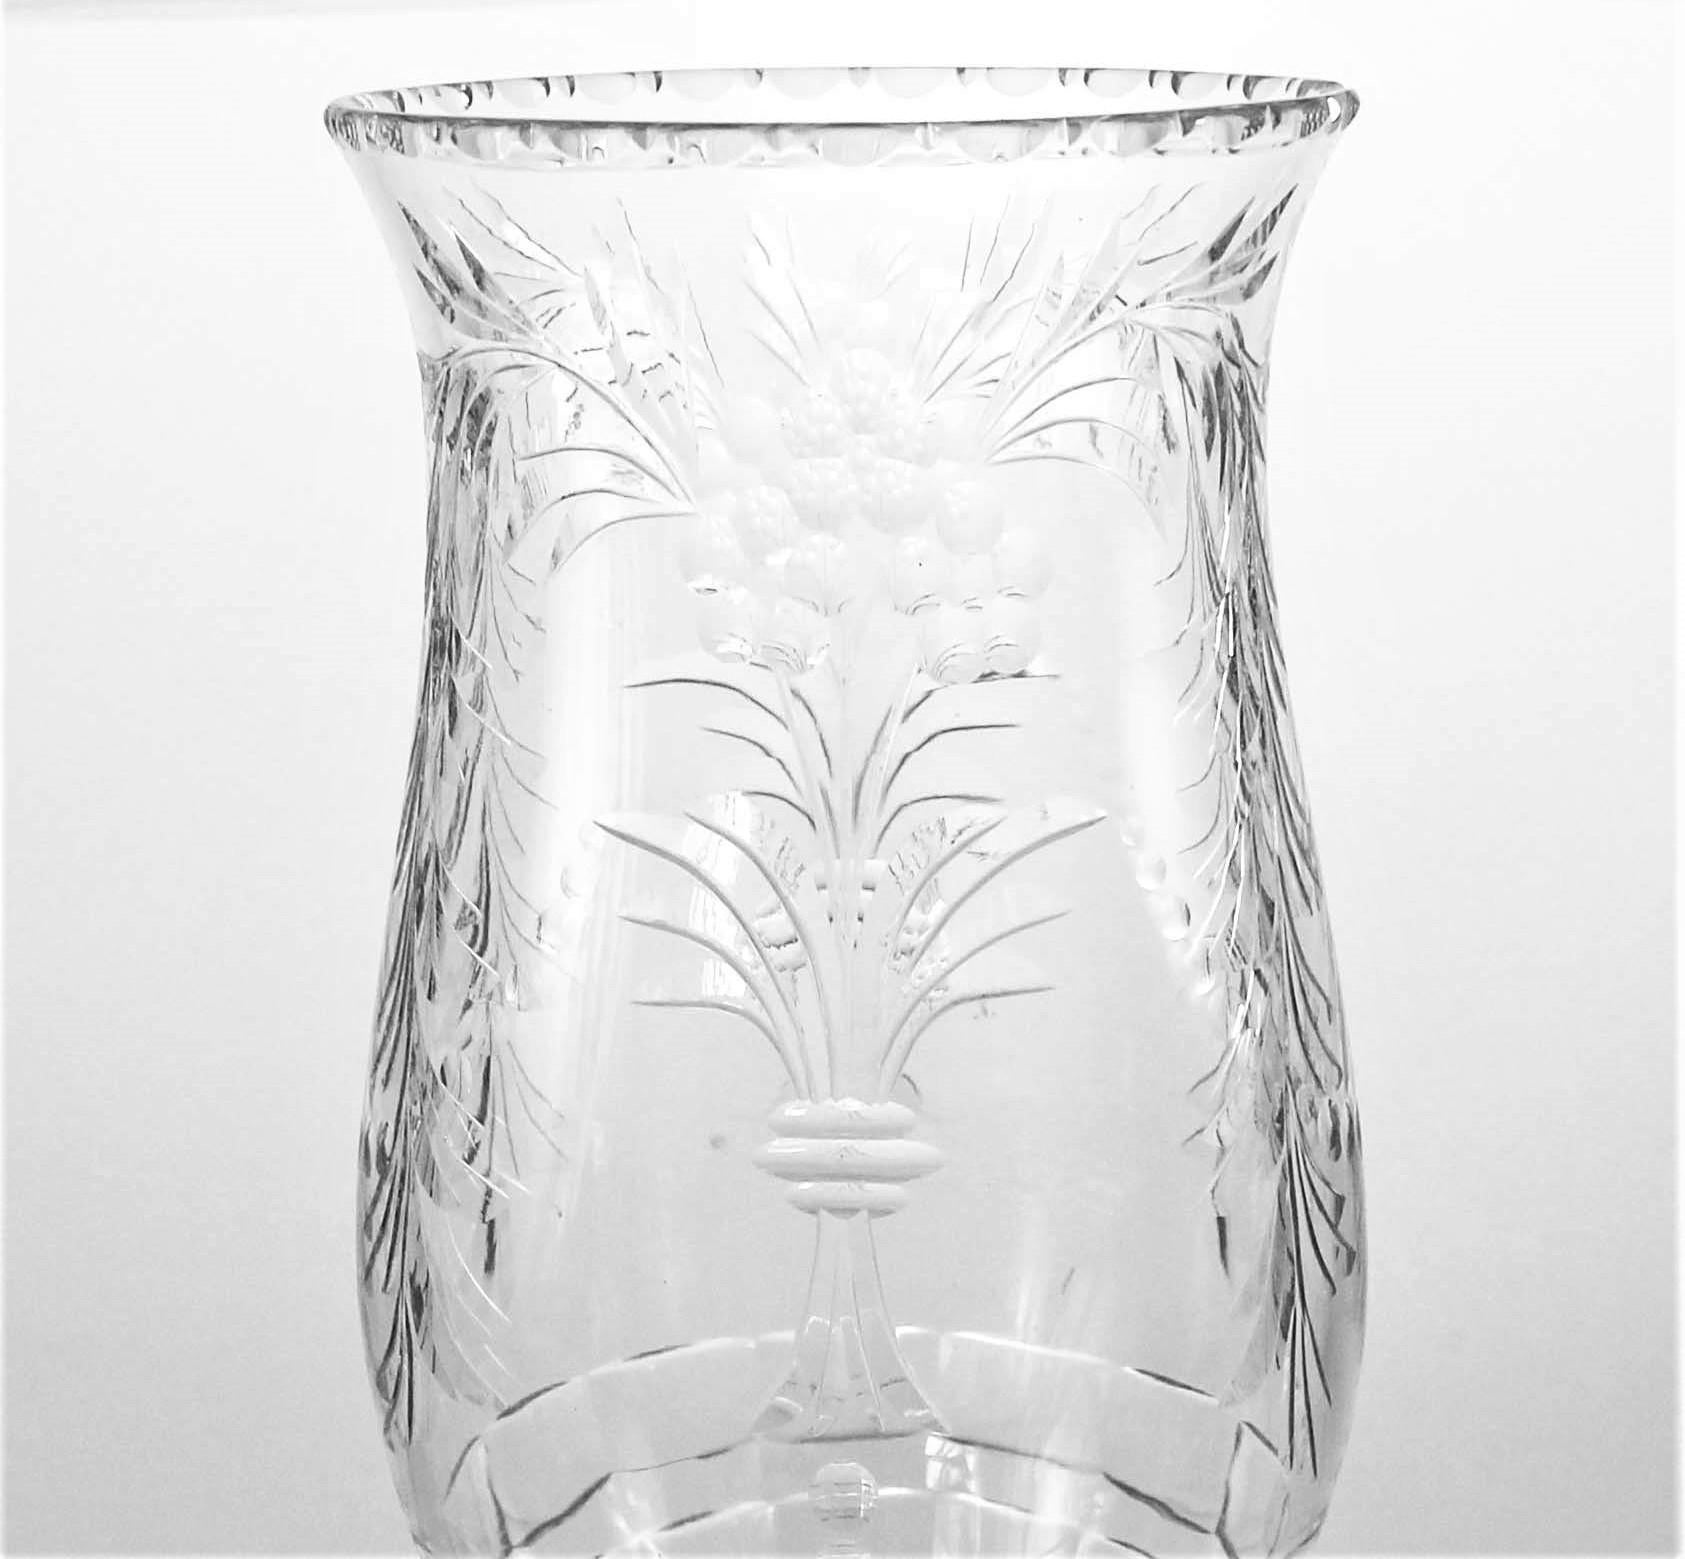 A fine mix between old-world elegance and modern chic. This vase has a sterling silver vase that has “steps”; a gradual raise in the silver. The crystal is a combination of cut and beveled crystal. There is an indented pattern running along the